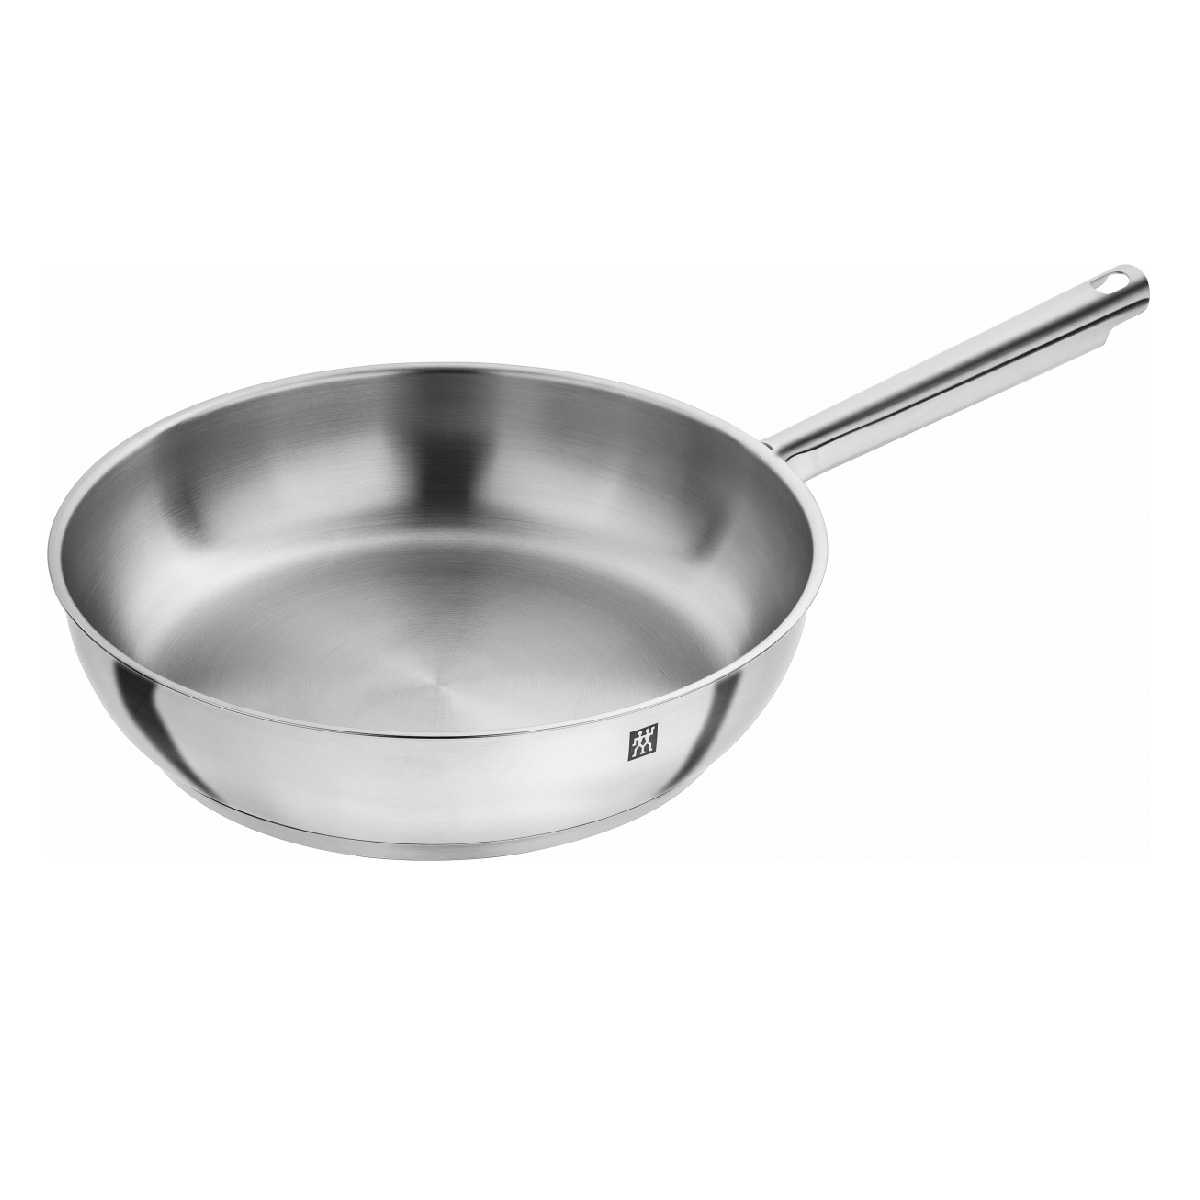 ZWILLING - Chảo inox ZWILLING Base - 28cm